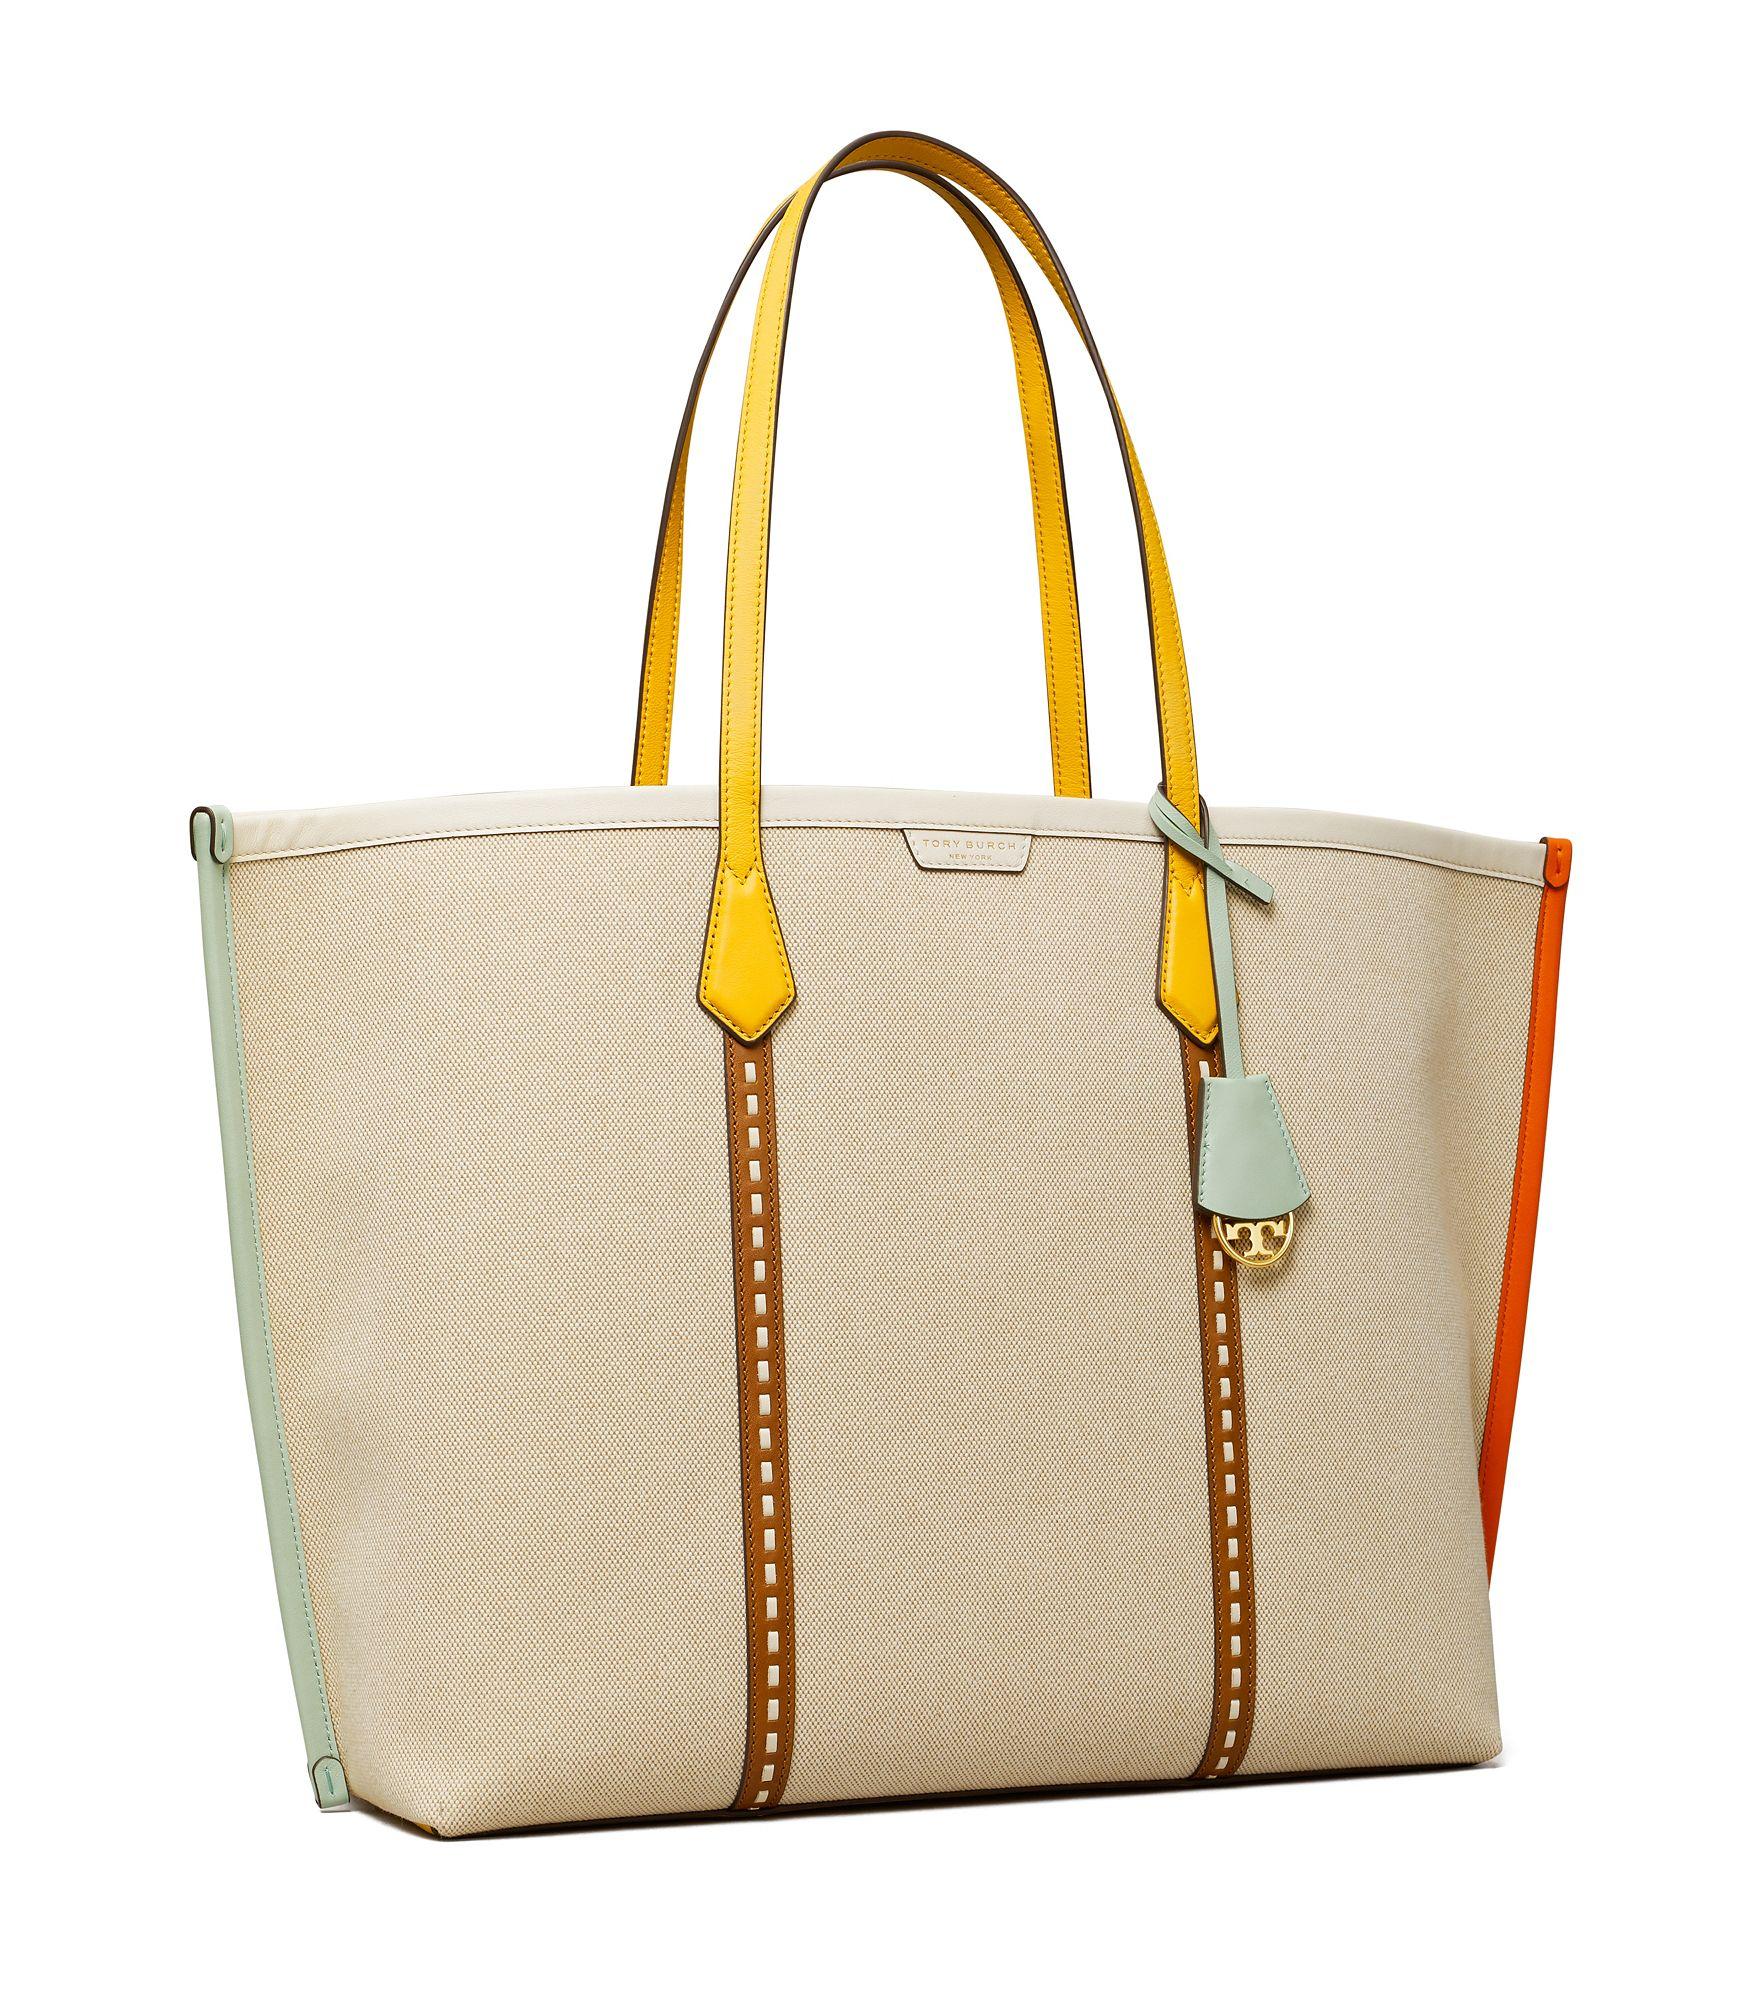 Tory Burch Perry Canvas Oversized Tote Bag in Natural